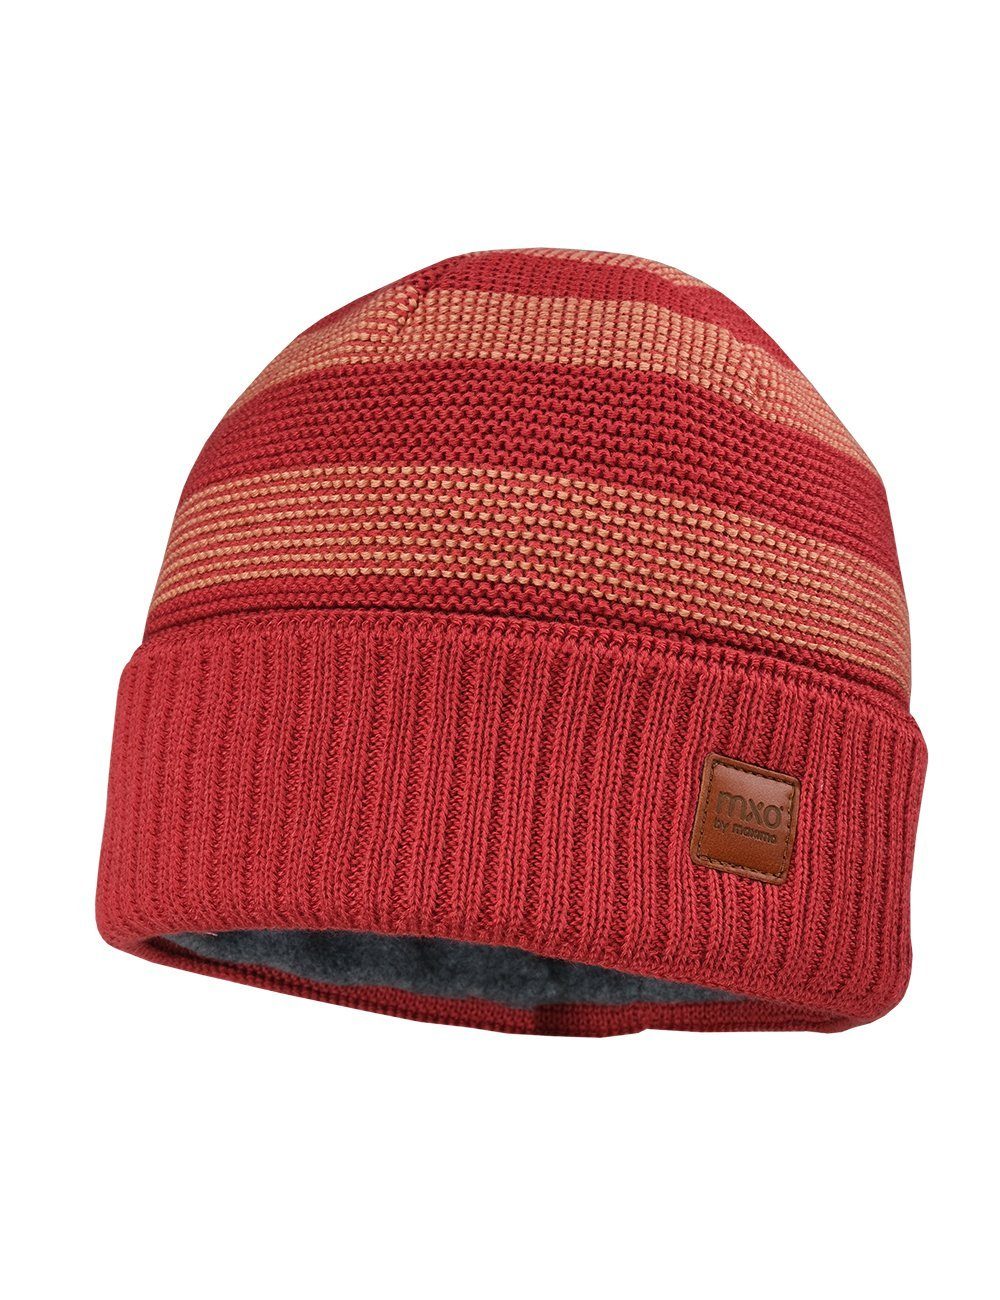 MAXIMO Strickmütze GOTS MINI-Beanie, Umschlag LL, Futter GOTS Organi Made in Germany rosewood